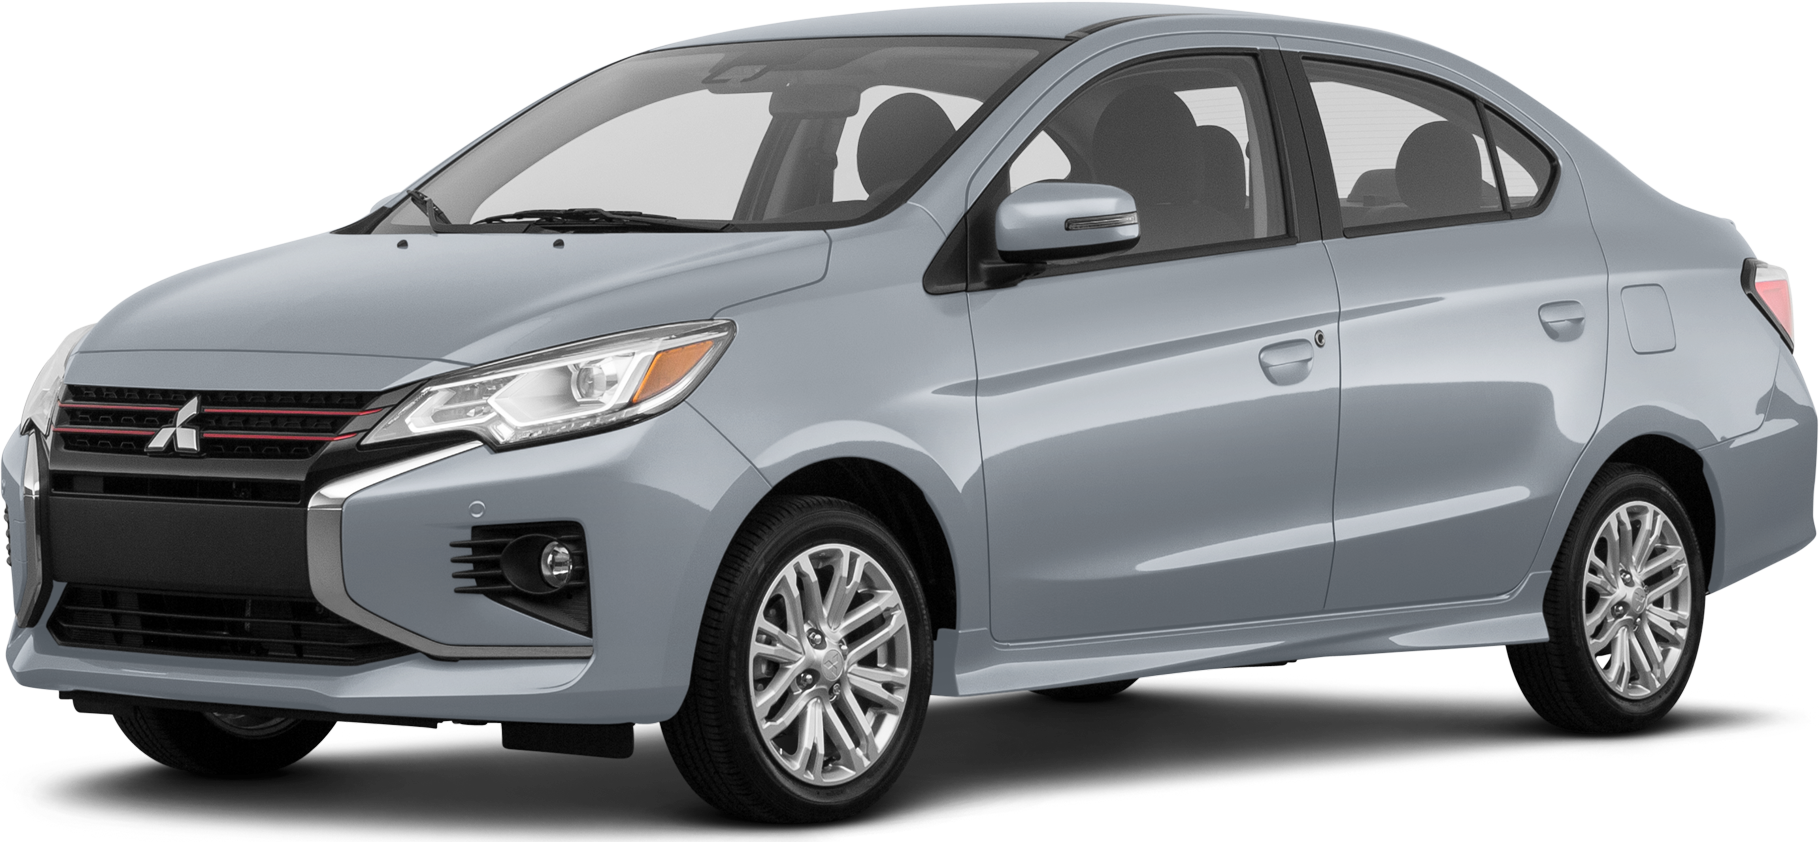 2017 Mitsubishi Mirage G4 GLX matic Auto, Cars for Sale, Used Cars on ...